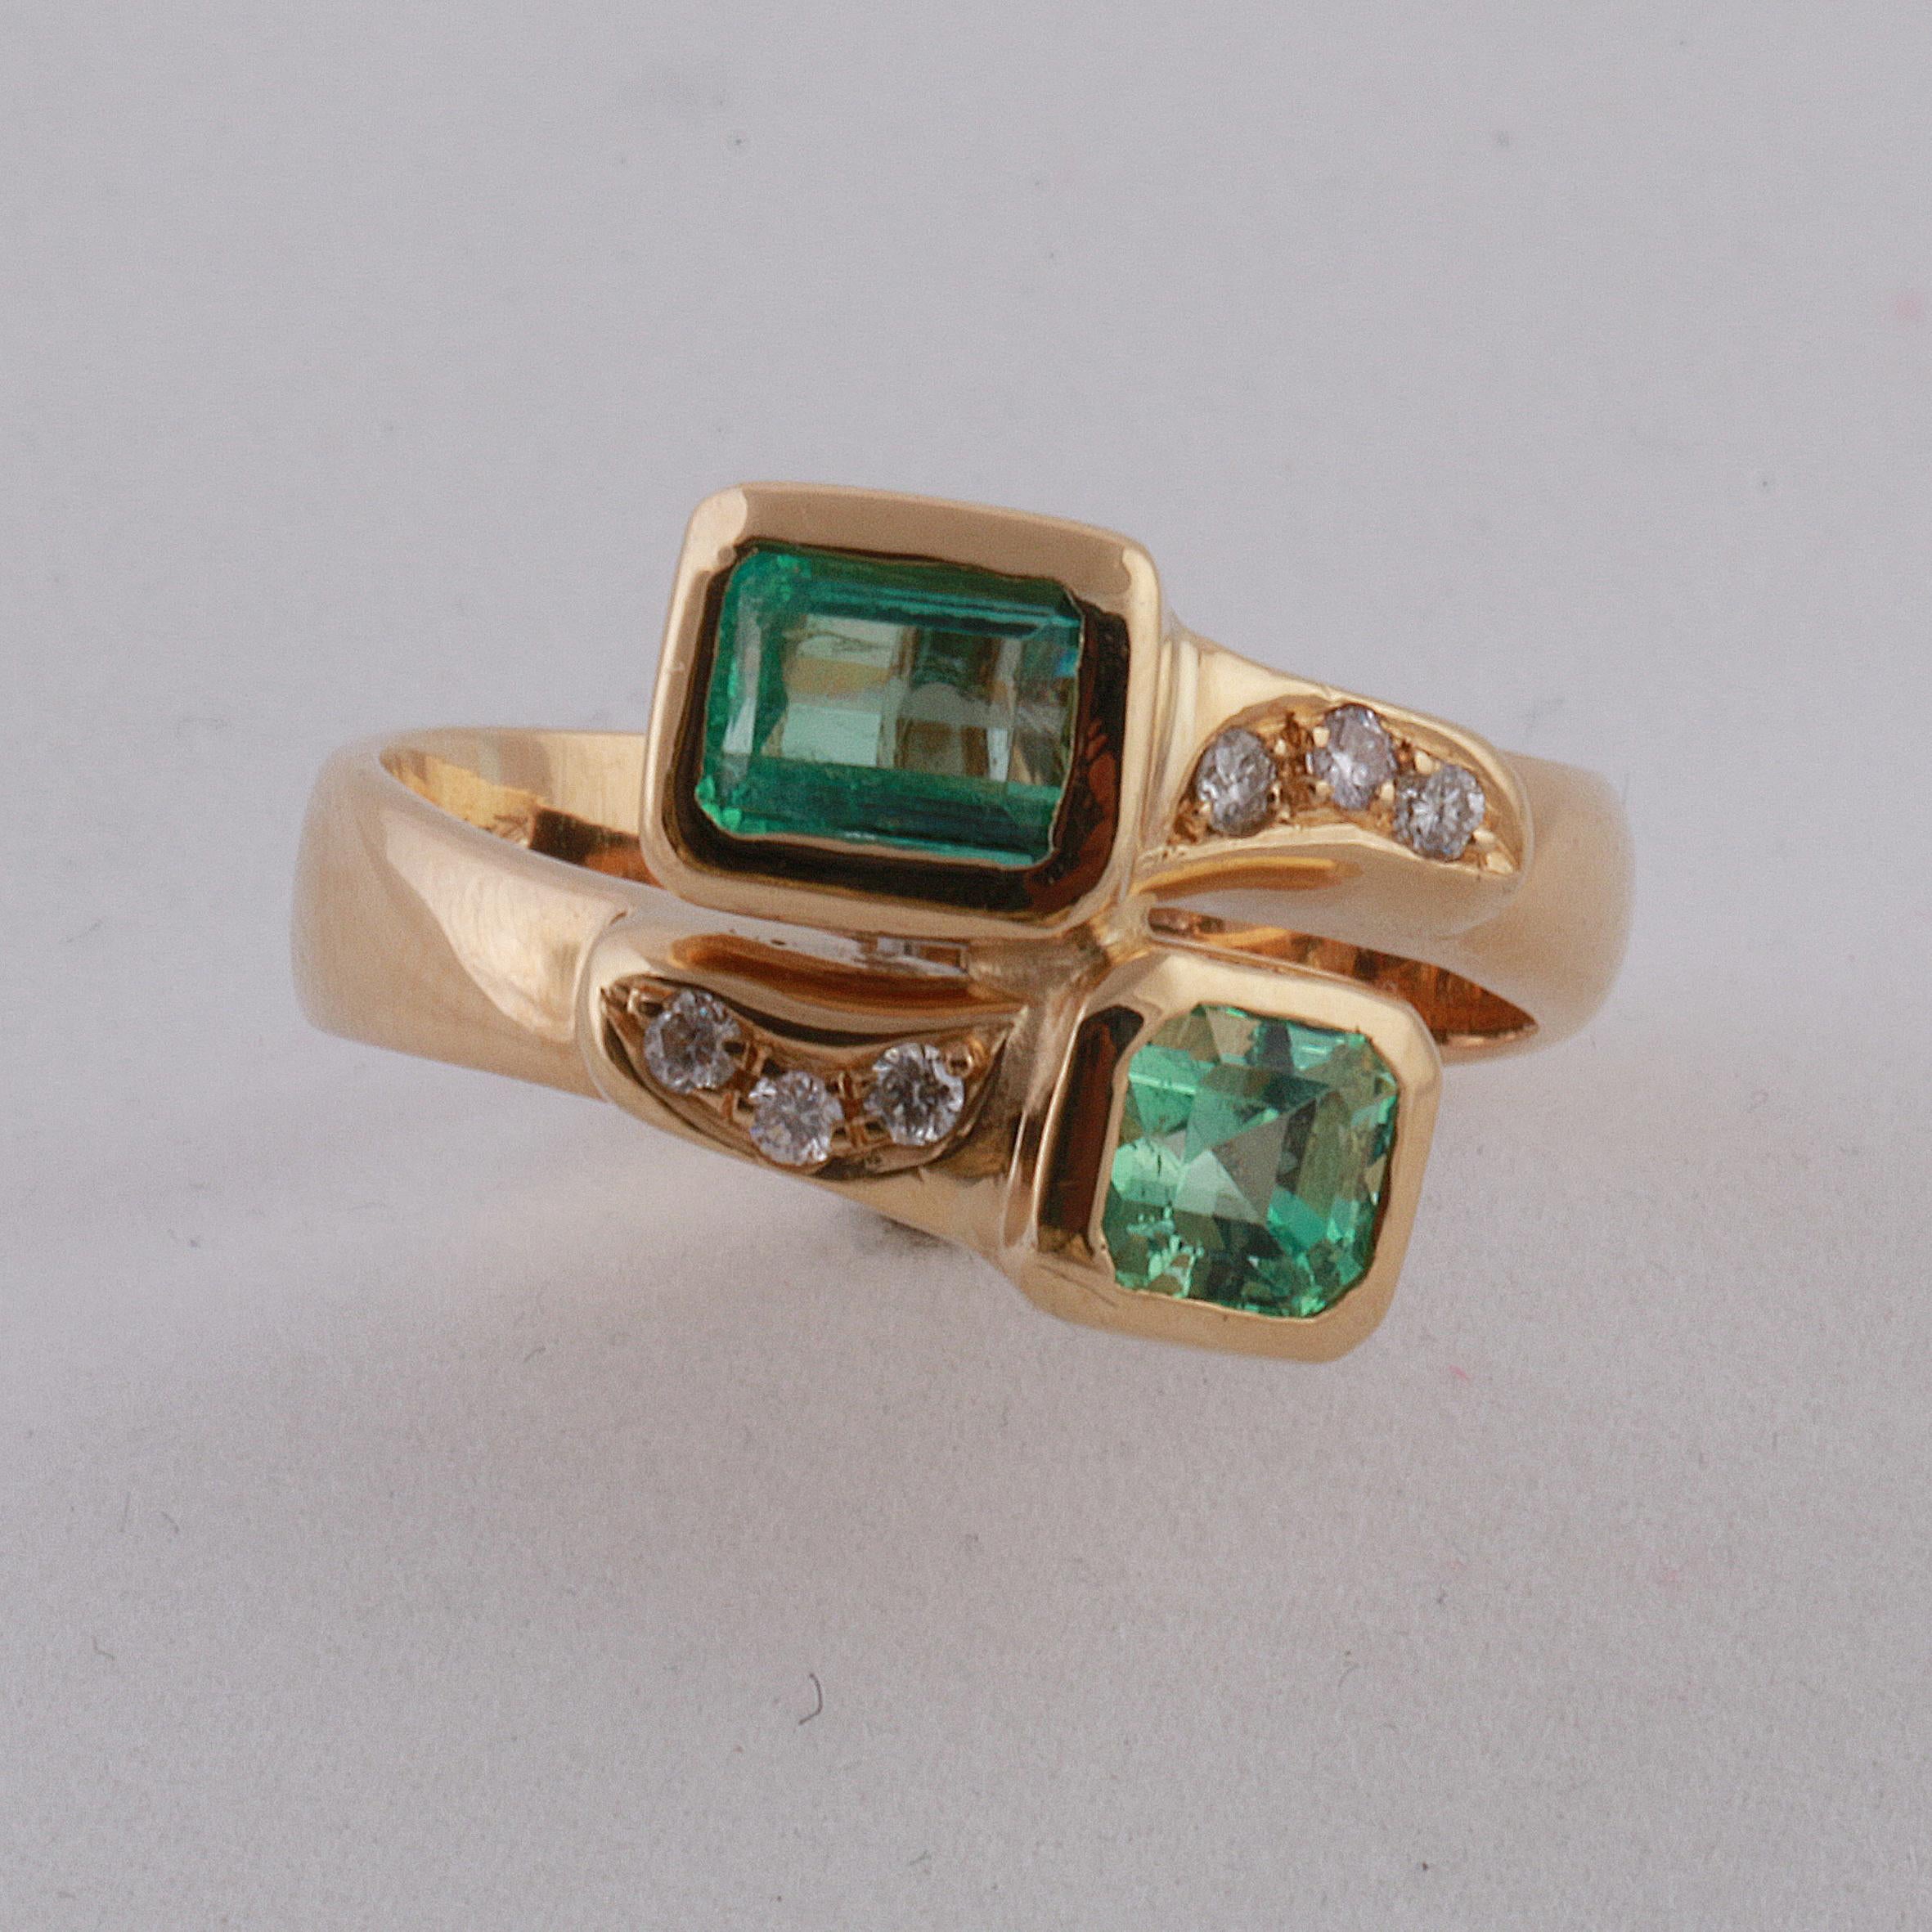 18K Yellow Gold Ring with two Emeralds (1 rectangular cut 0.70cts and 1 square cut 0.50cts), matching color, transparent light green,  and six Diamonds (brilliant round cut 0.12cts). Made in Italy. 750 stamp. 1990's. Size EU: 58 Us:18.